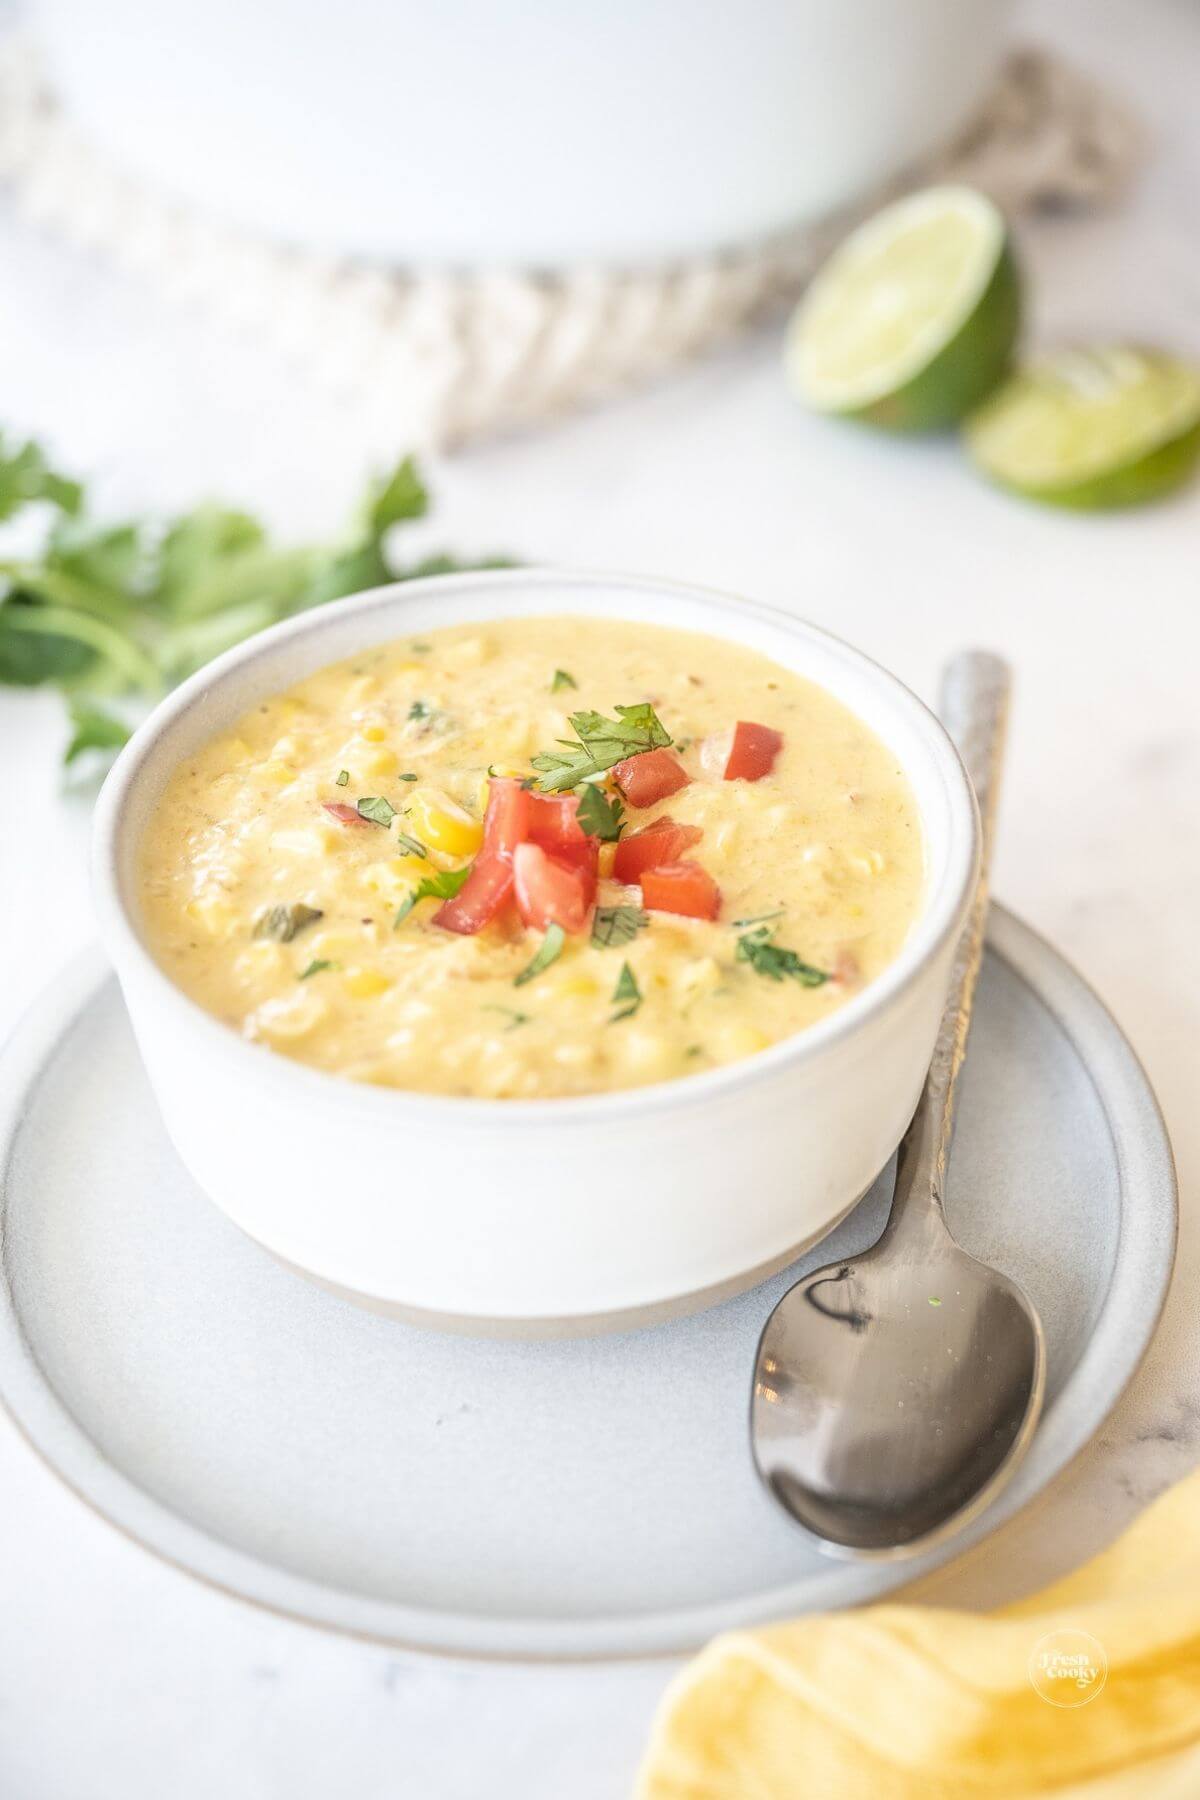 Panera bread corn chowder recipe in bowl with toppings and a spoon, for pinning. 